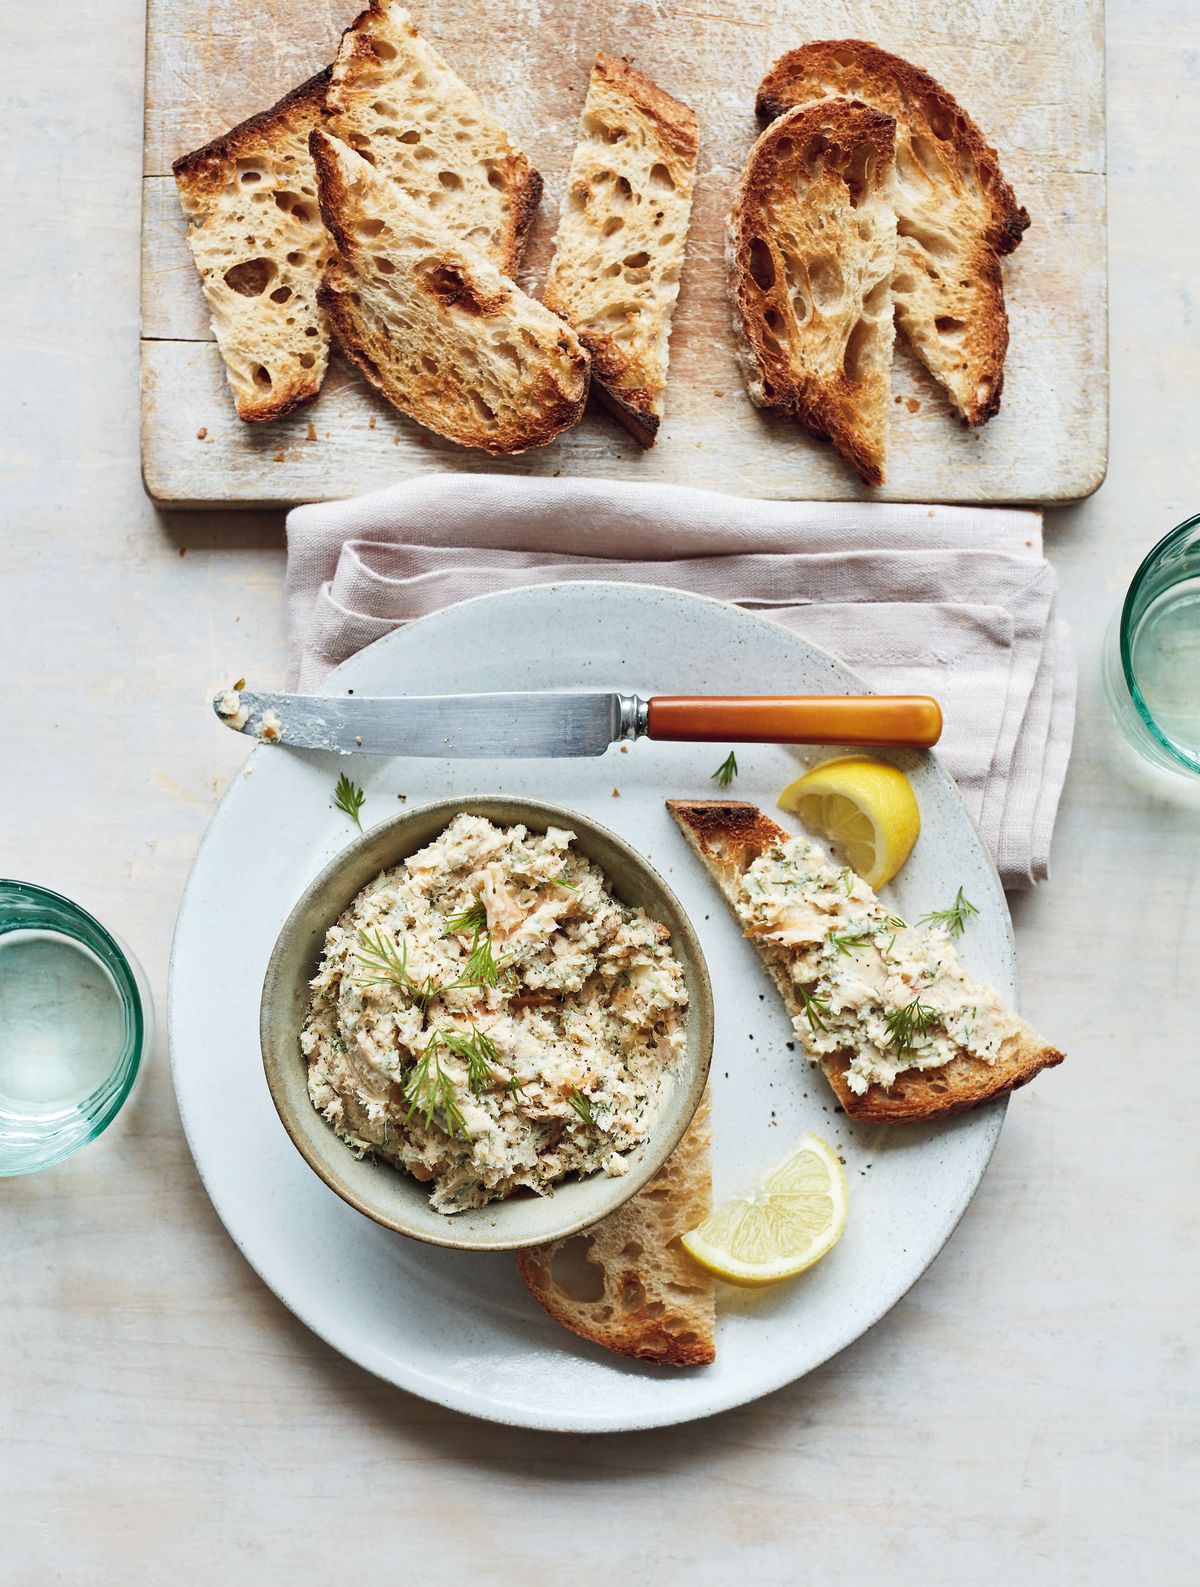 Mary Berry’s Rustic Smoked Trout and Anchovy Pâté